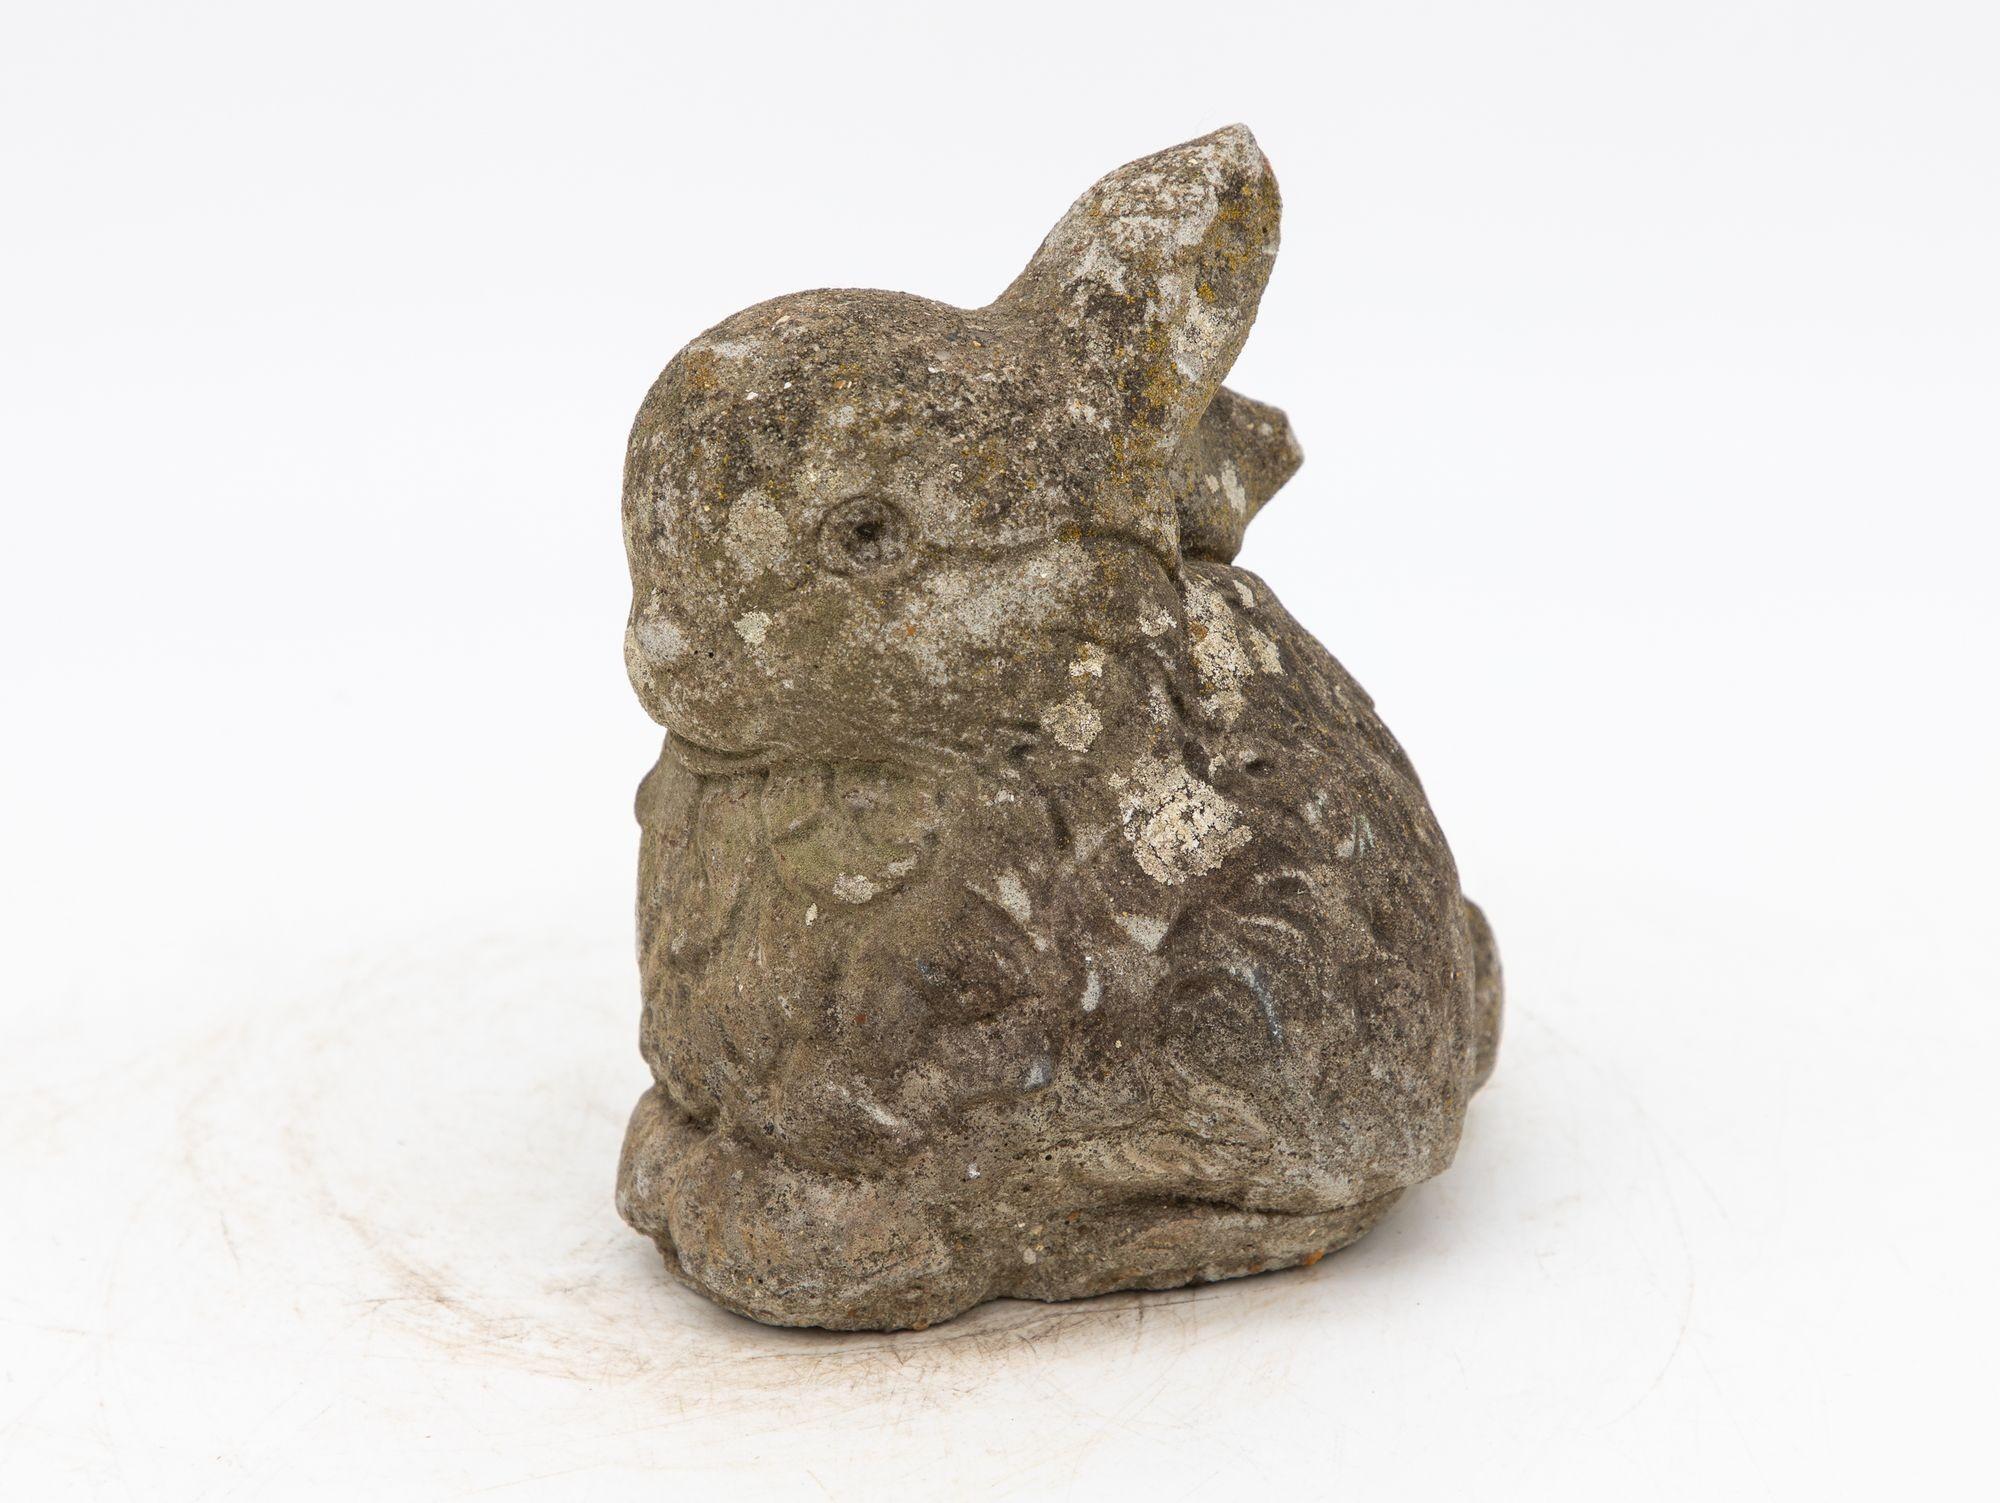 This delightful mid-20th century French garden ornament brings the playful charm of a rabbit or bunny to your outdoor space. This whimsical creature features a gray lifelike body, accentuated by charming touches of patina throughout. The adorable